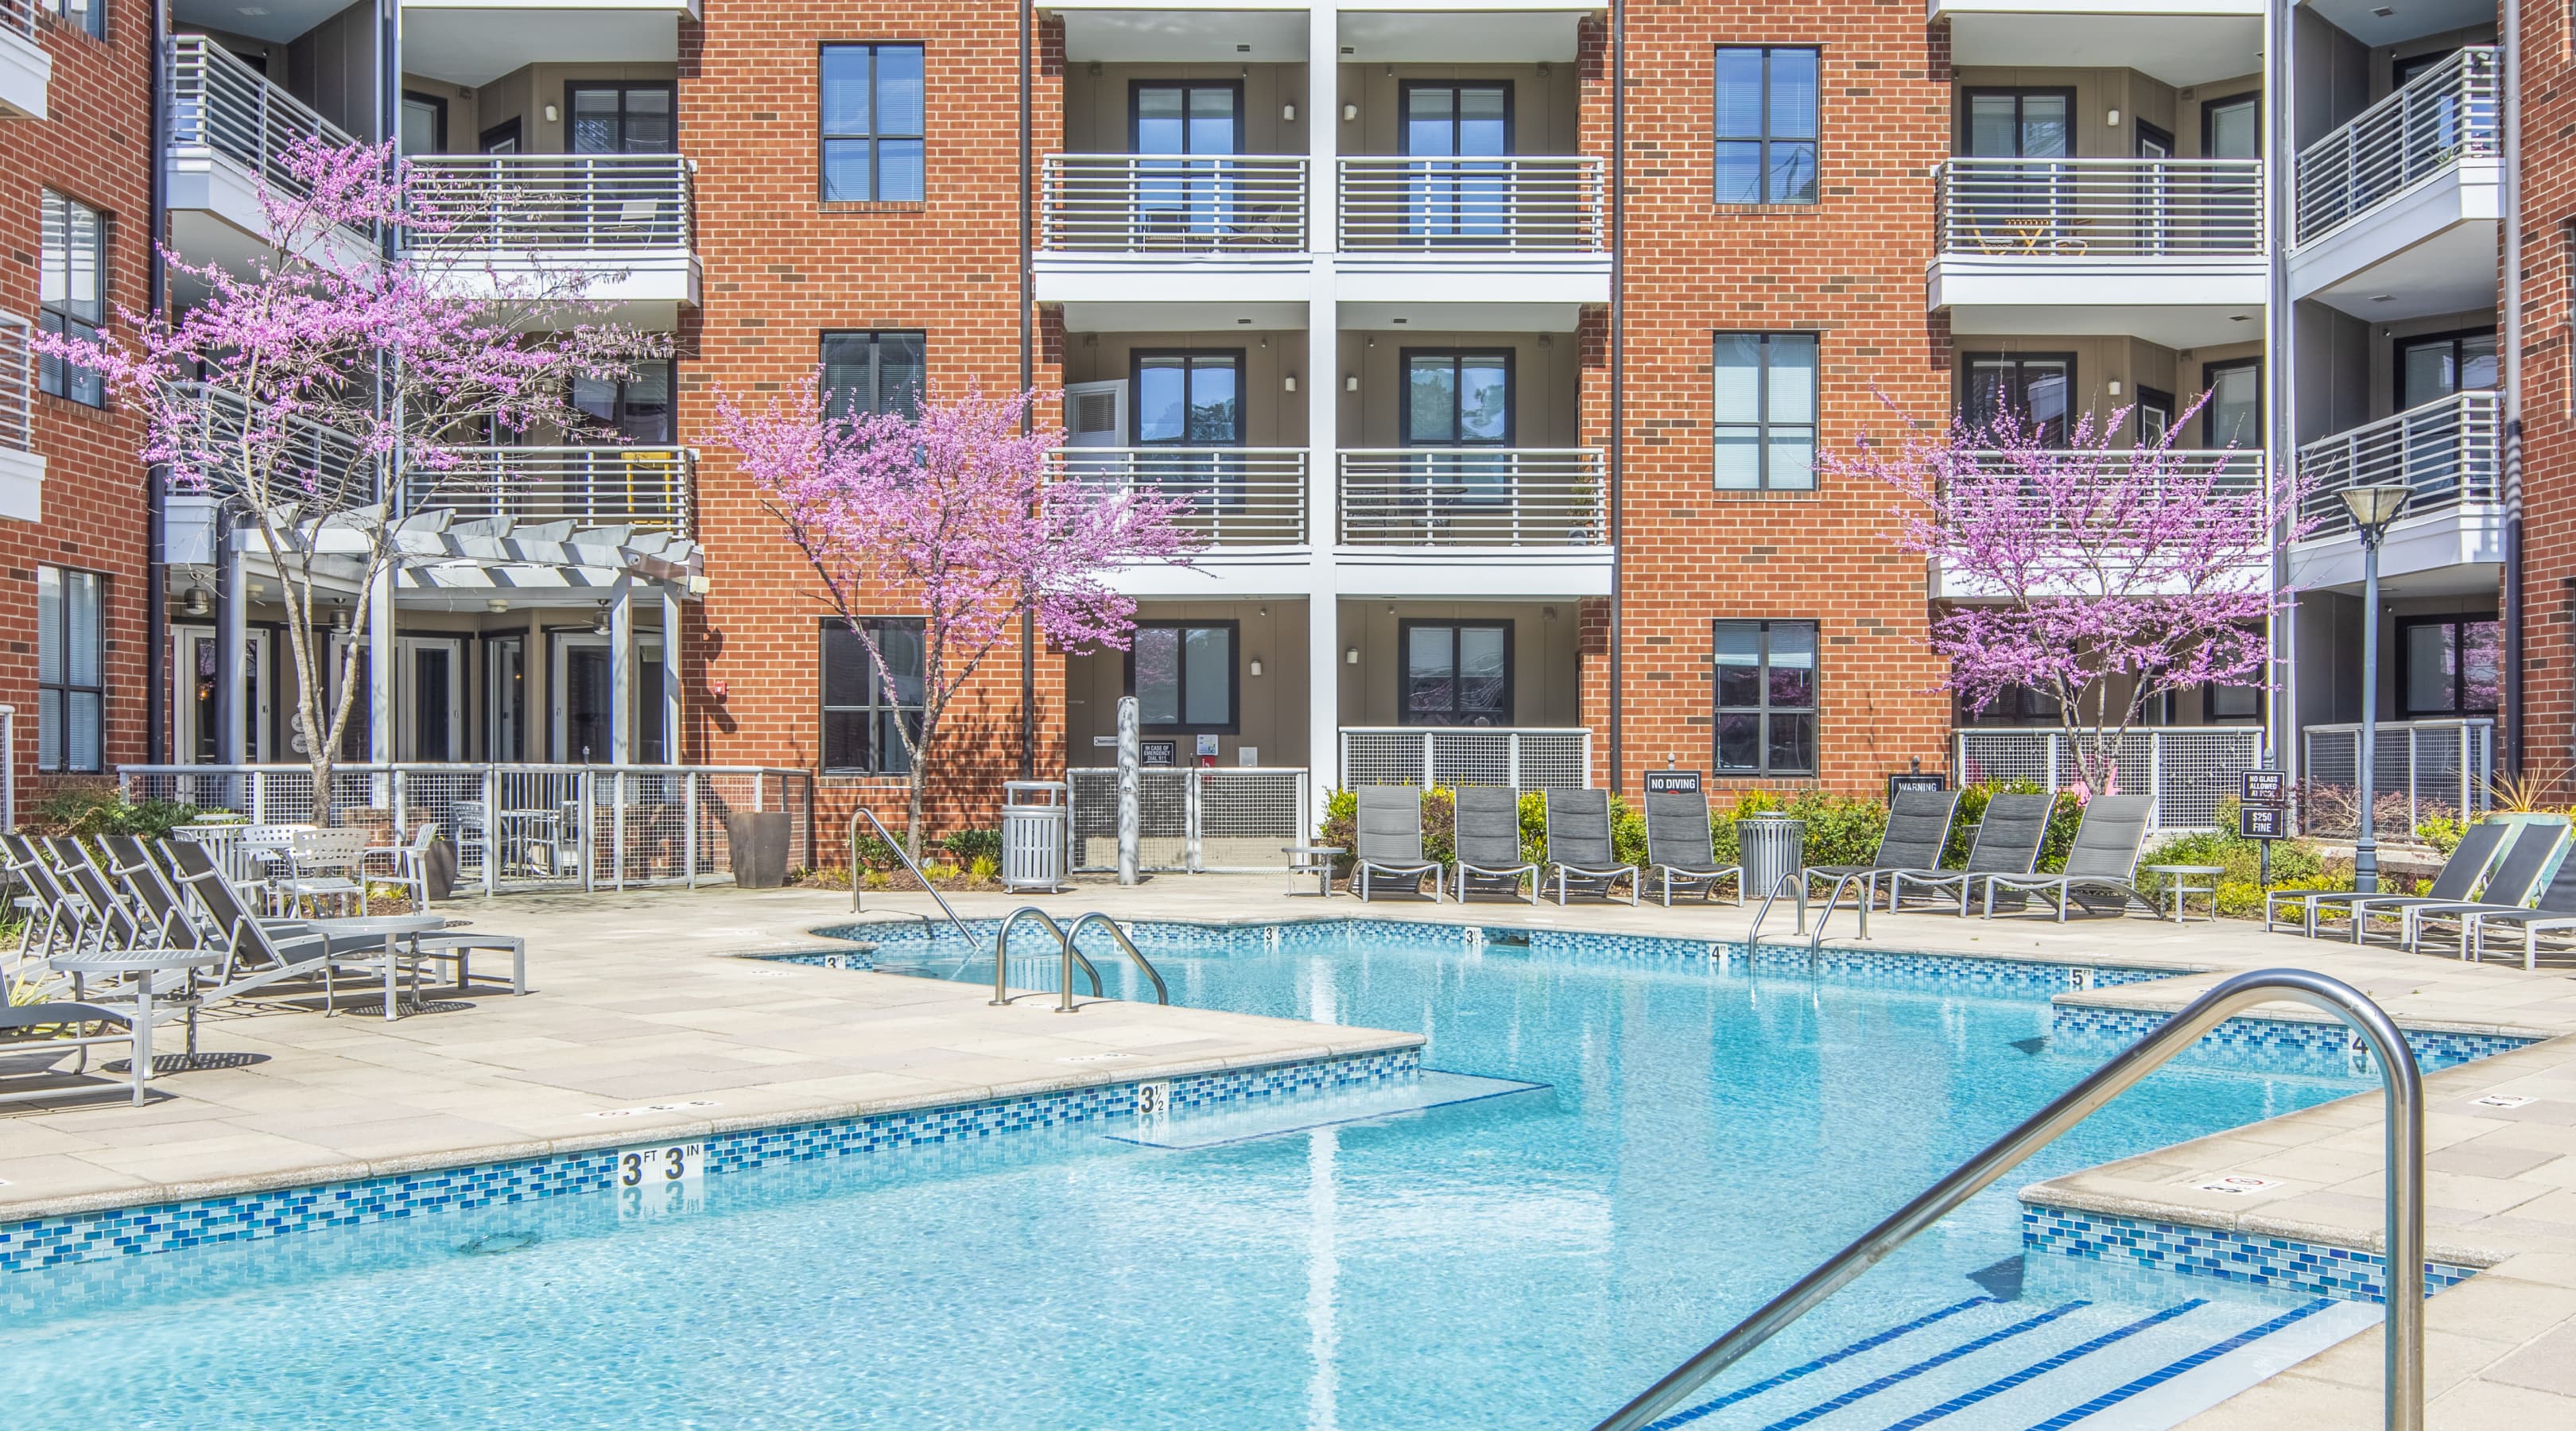 Maa South Line Luxury Apartments For Rent In Charlotte Nc Maa